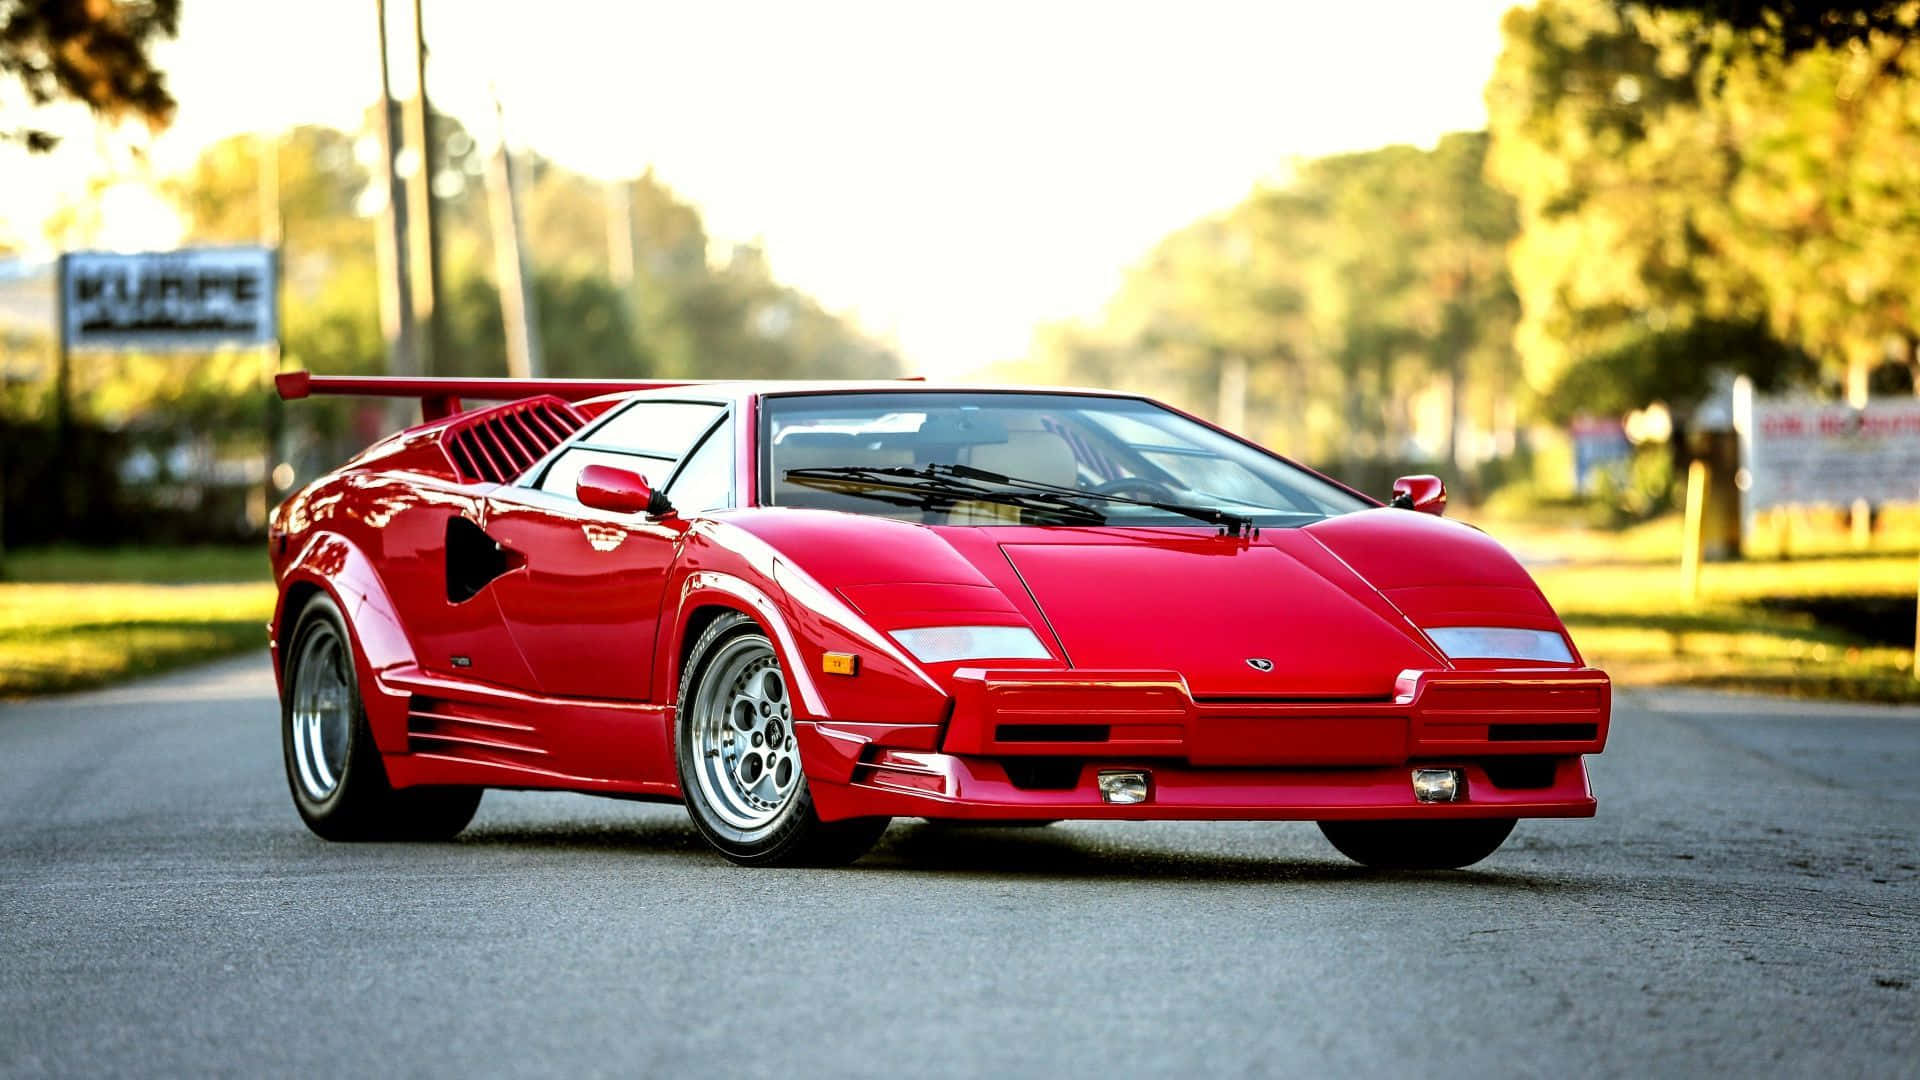 Lamborghini Countach Wallpapers and Backgrounds